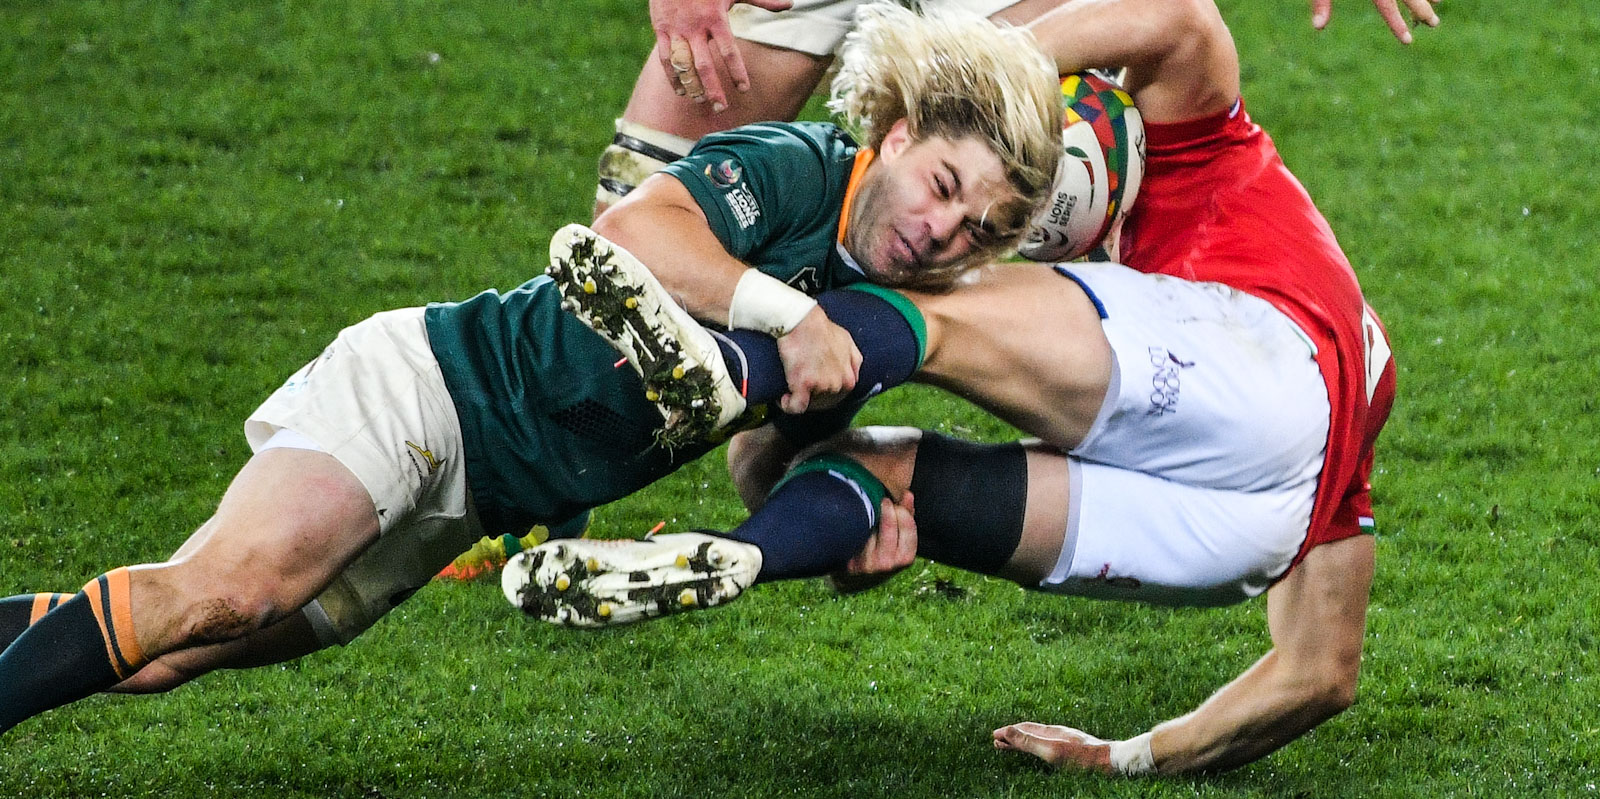 Faf de Klerk said the Boks want to fix their errors from the first Test.